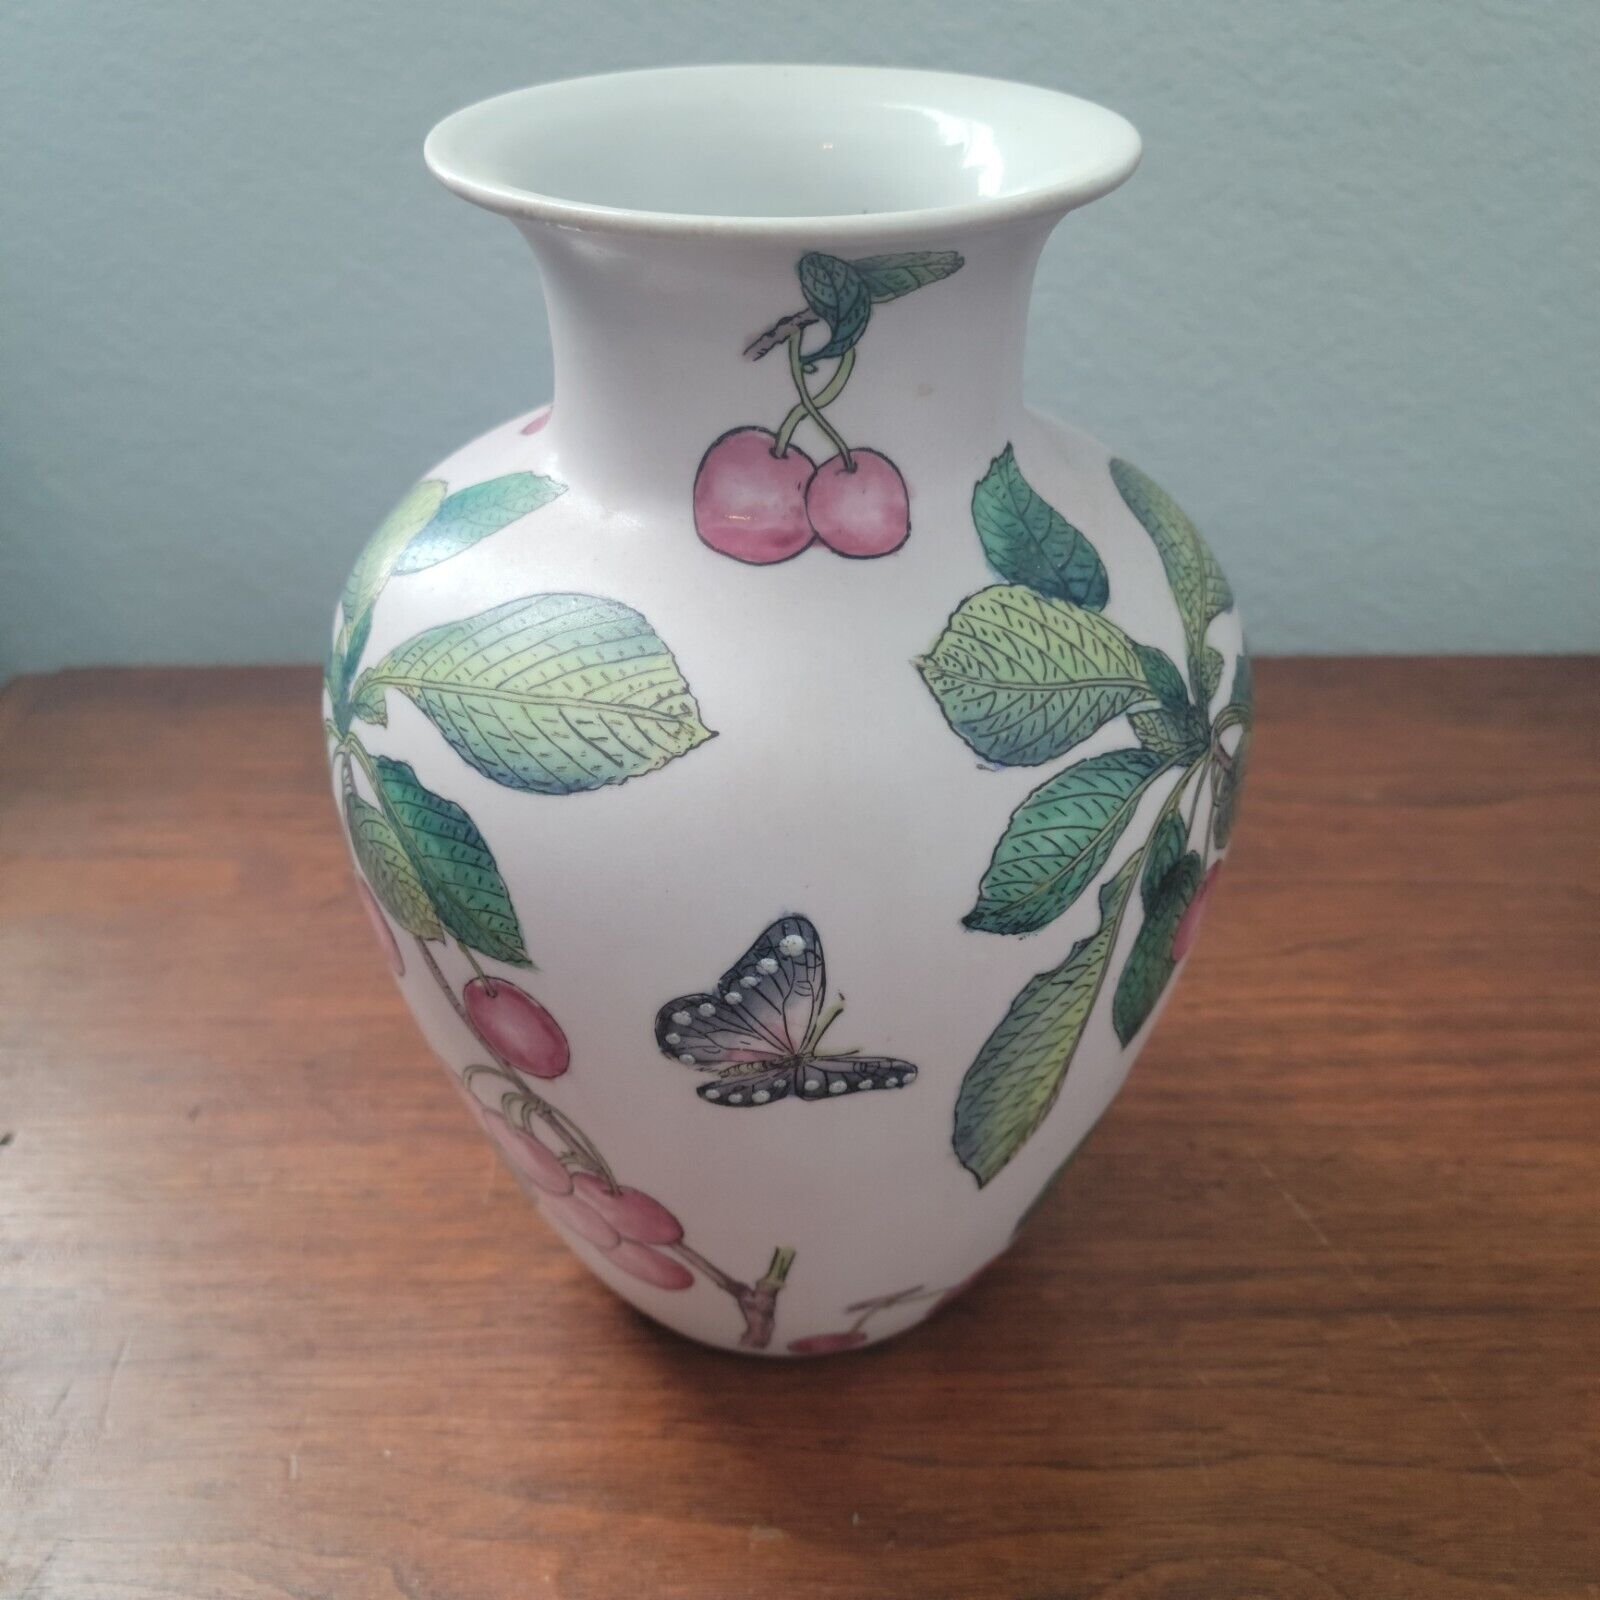 Andrea by Sedak White porcelain vase Made in China Butterflies Cherries Branches